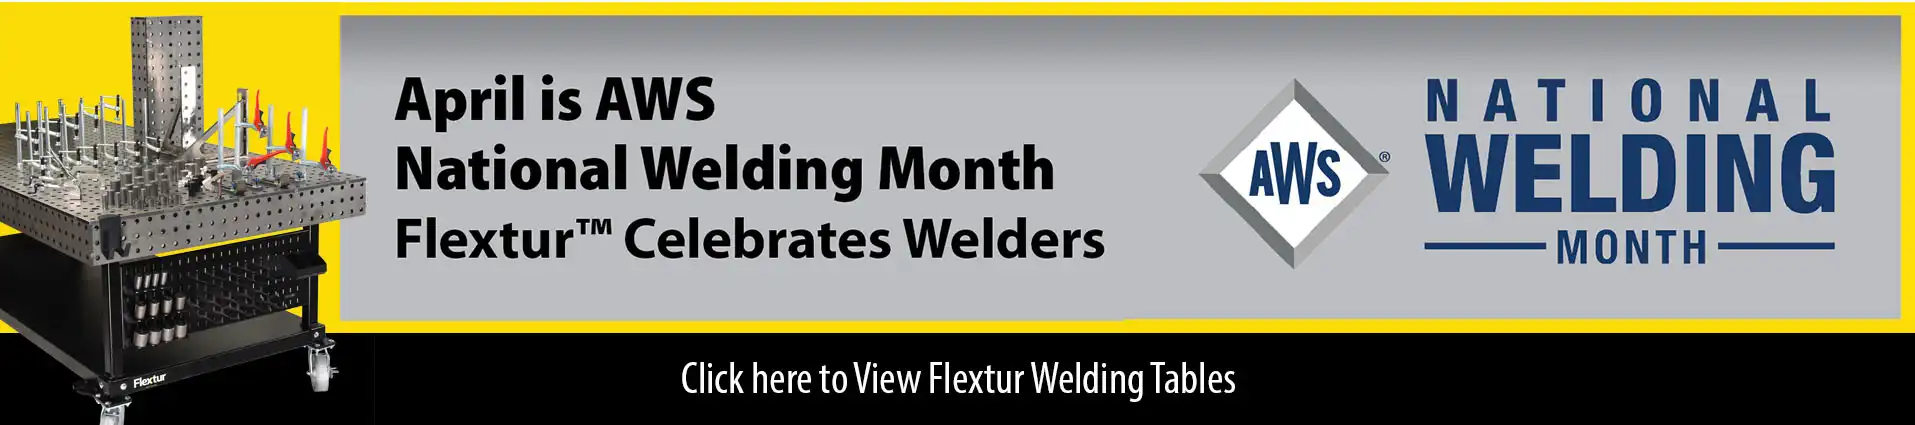 April is Welding Month